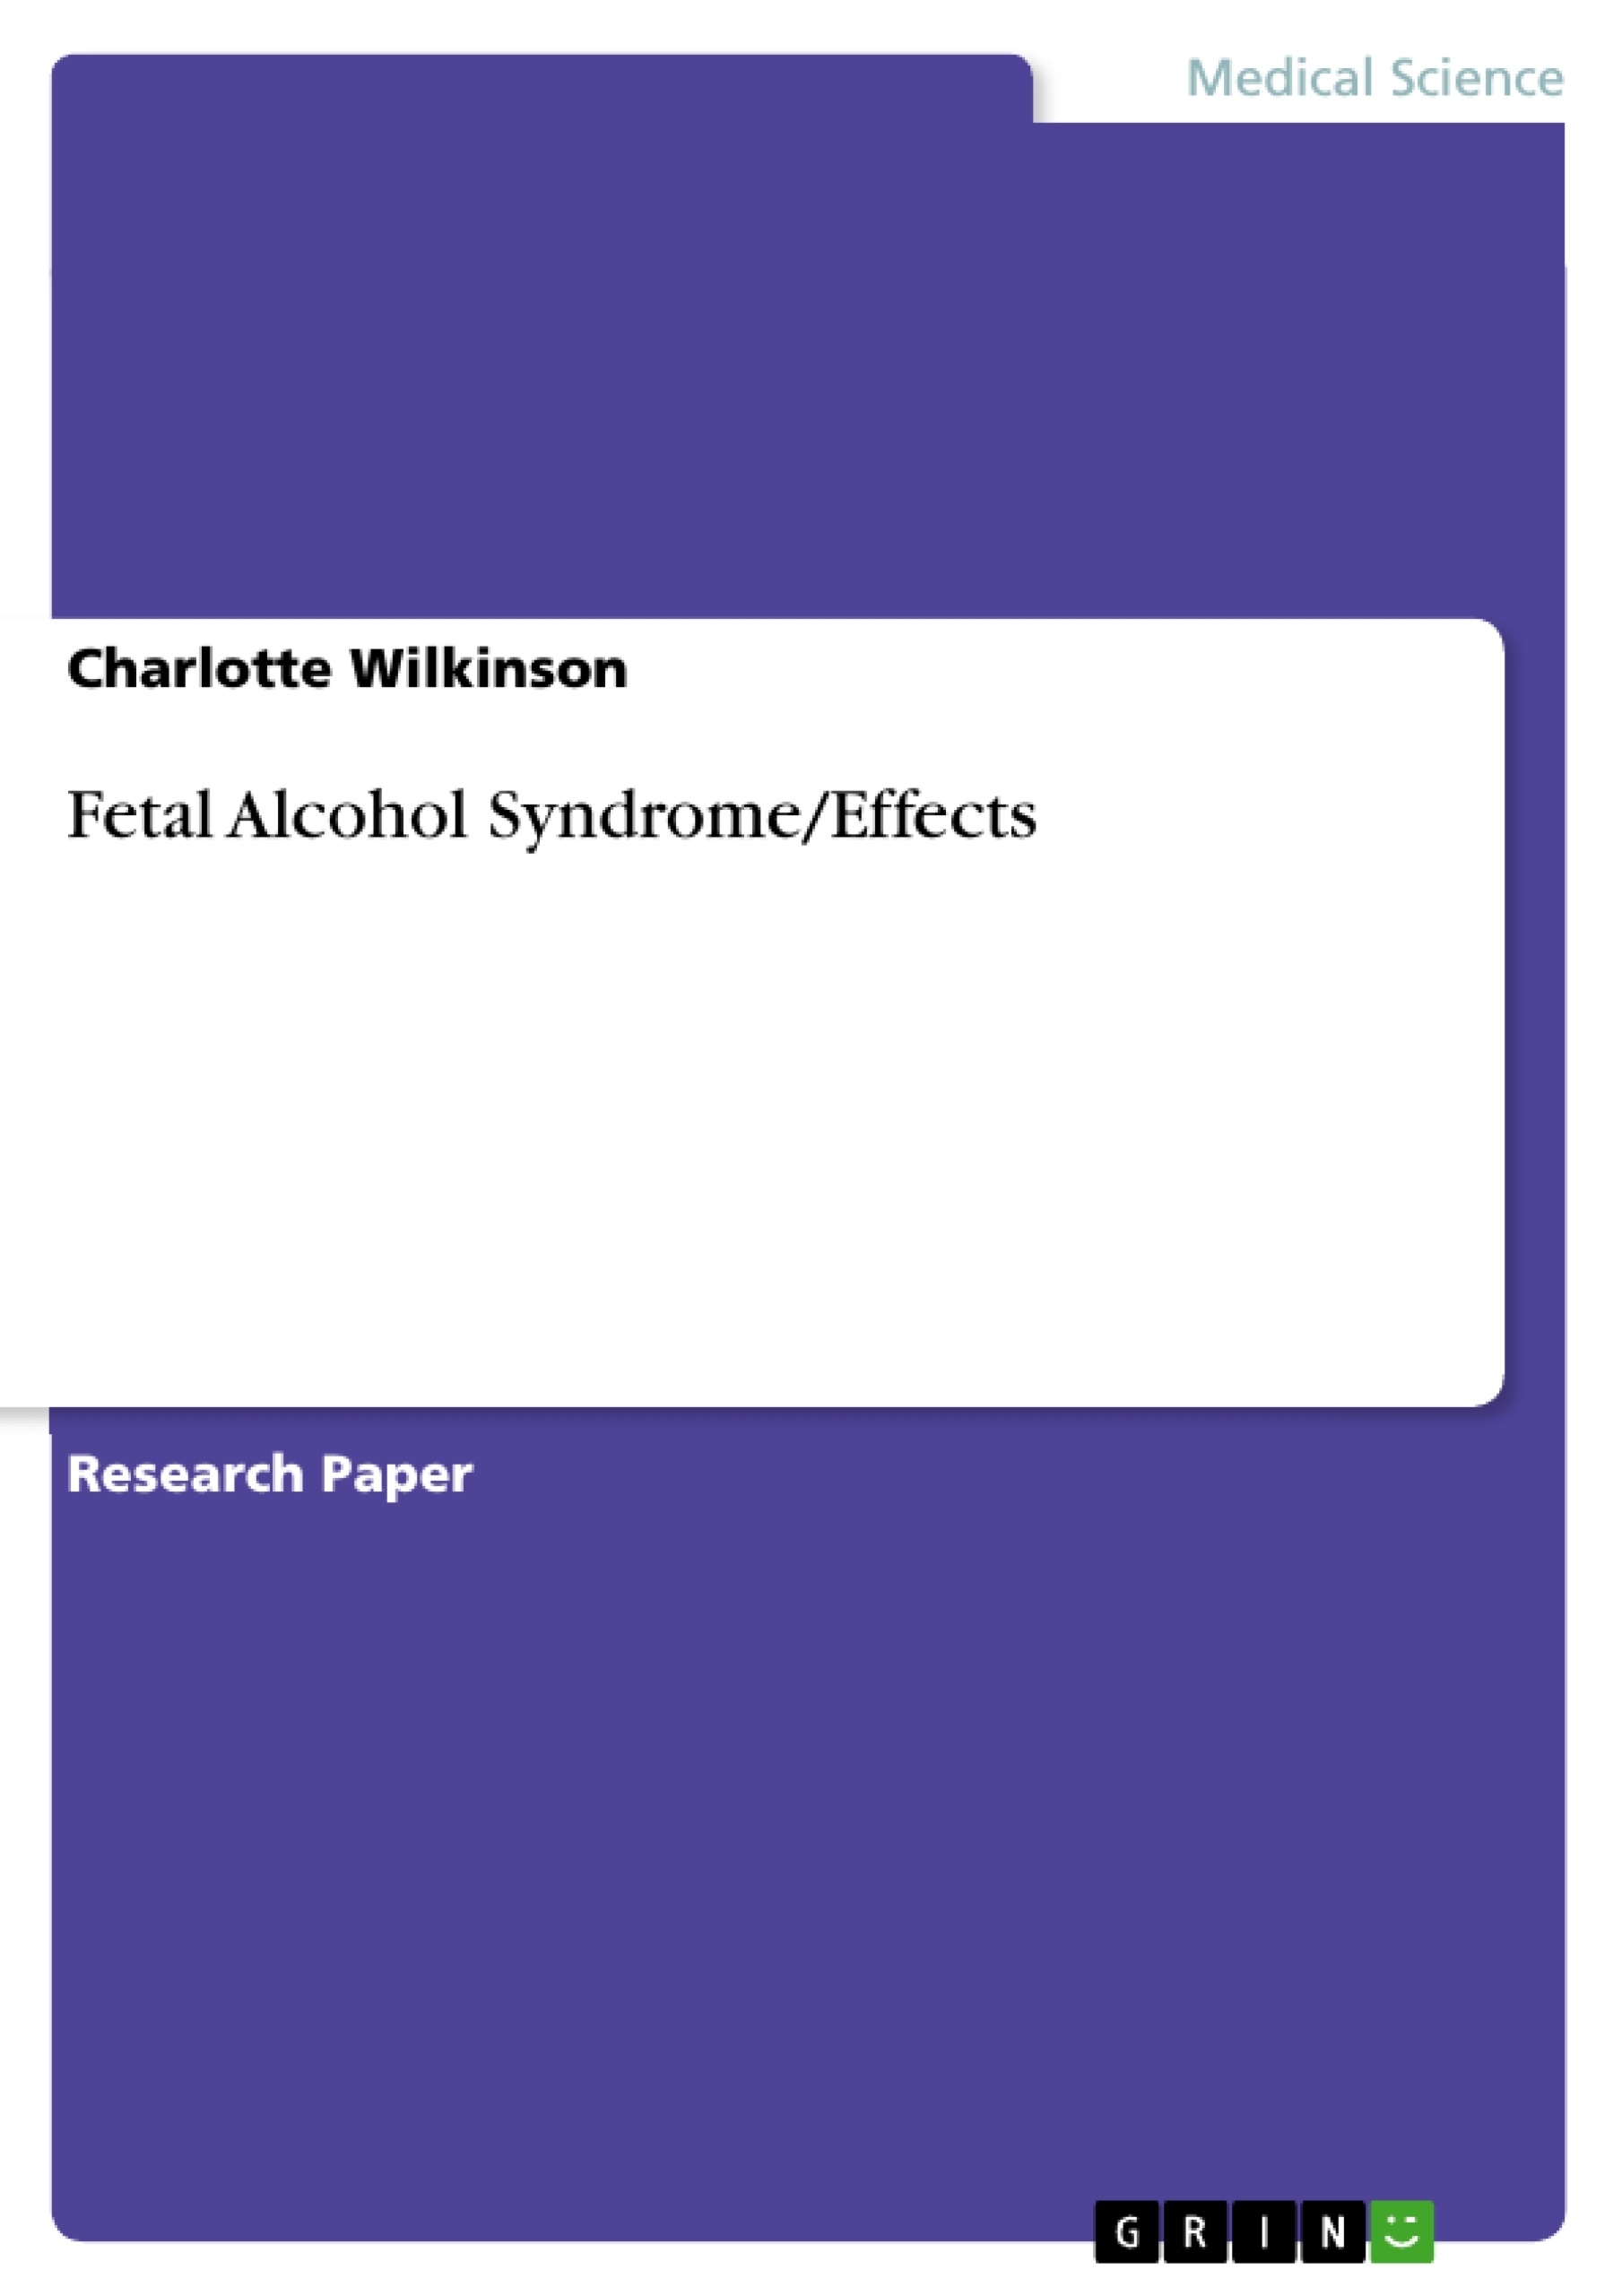 Title: Fetal Alcohol Syndrome/Effects